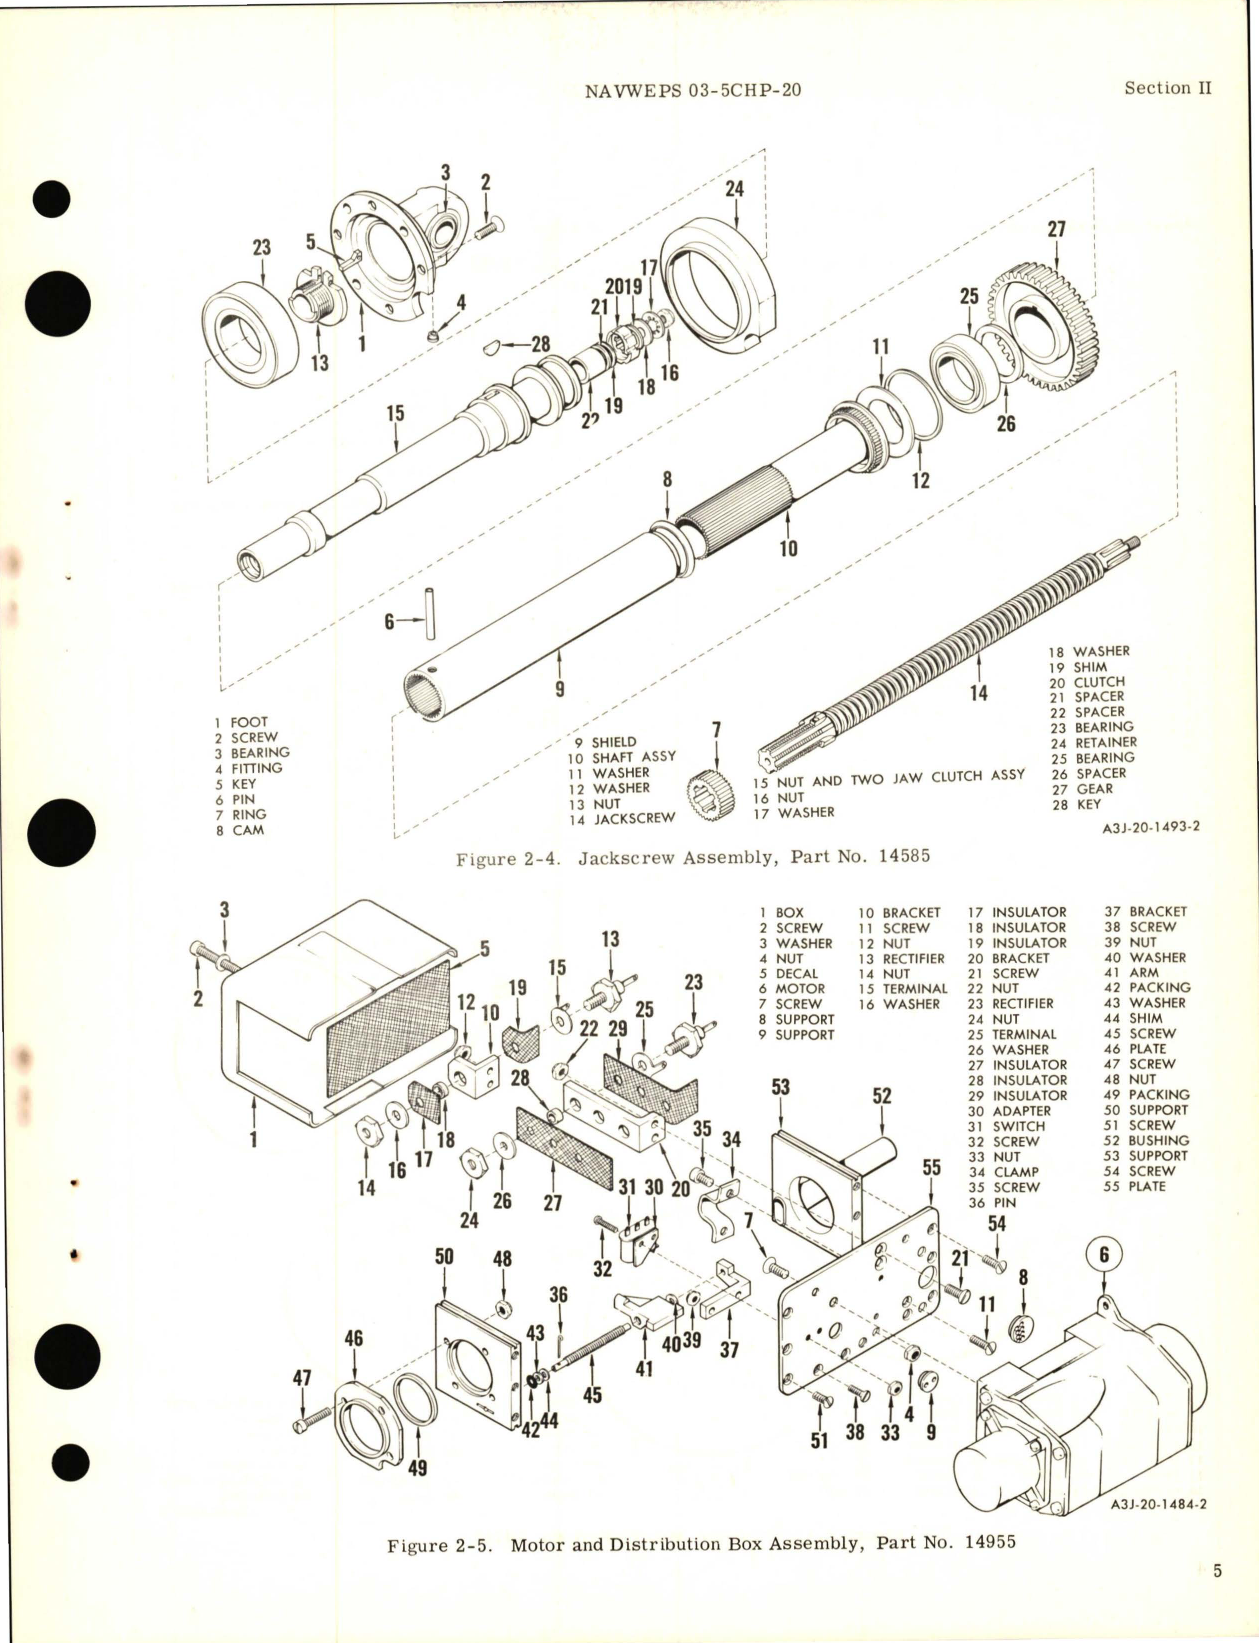 Sample page 9 from AirCorps Library document: Overhaul Instructions for Electro-Mechanical Linear Actuator 3850, 3850-1, 4060, and 4060-1